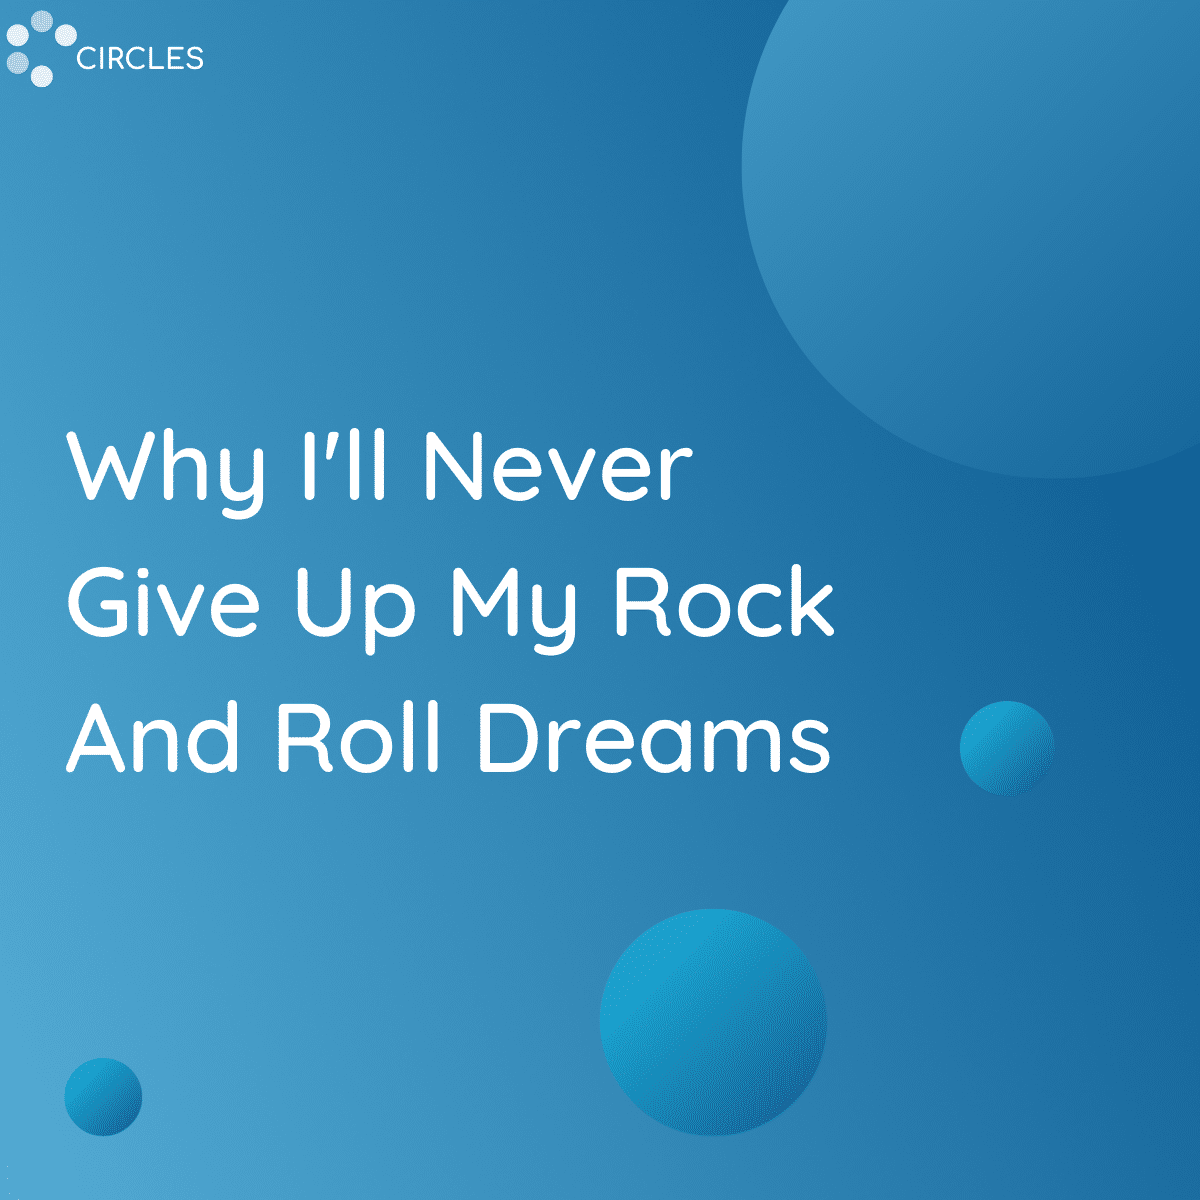 Why I’ll Never Give Up My Rock And Roll Dreams